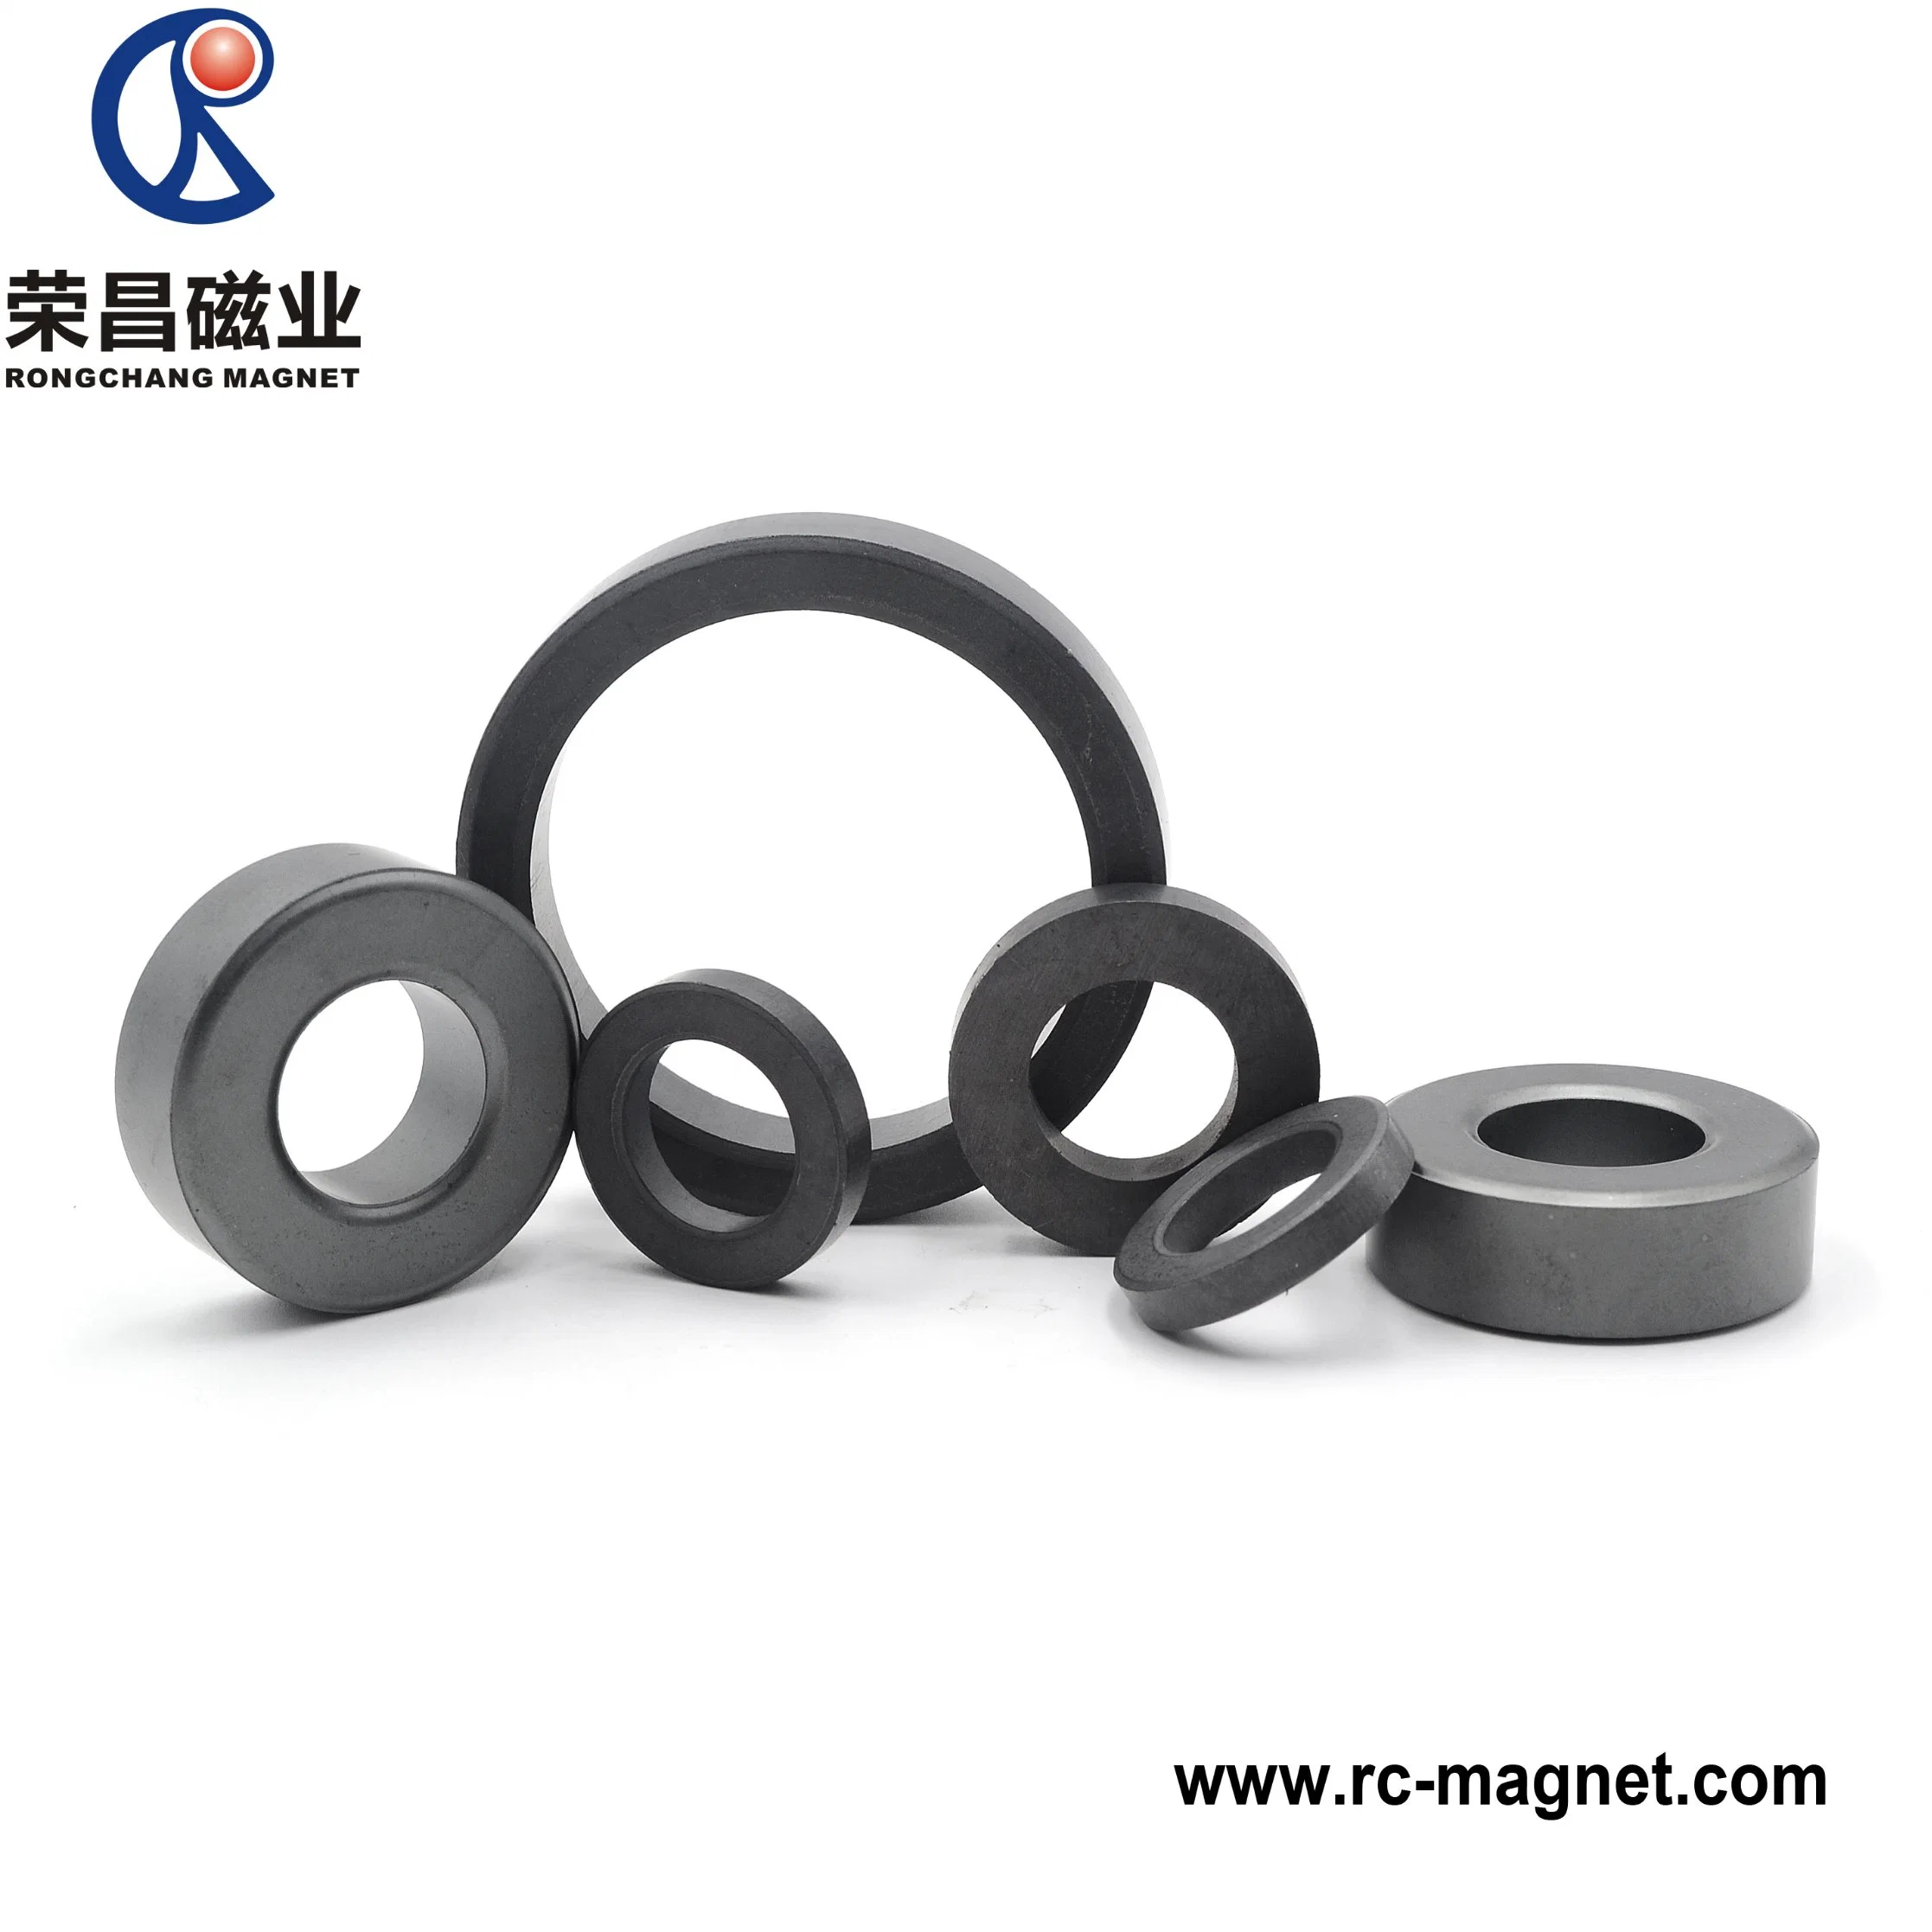 All Kinds of Strong Ring Shape Ferrite Magnet DC Motor Rotar Use